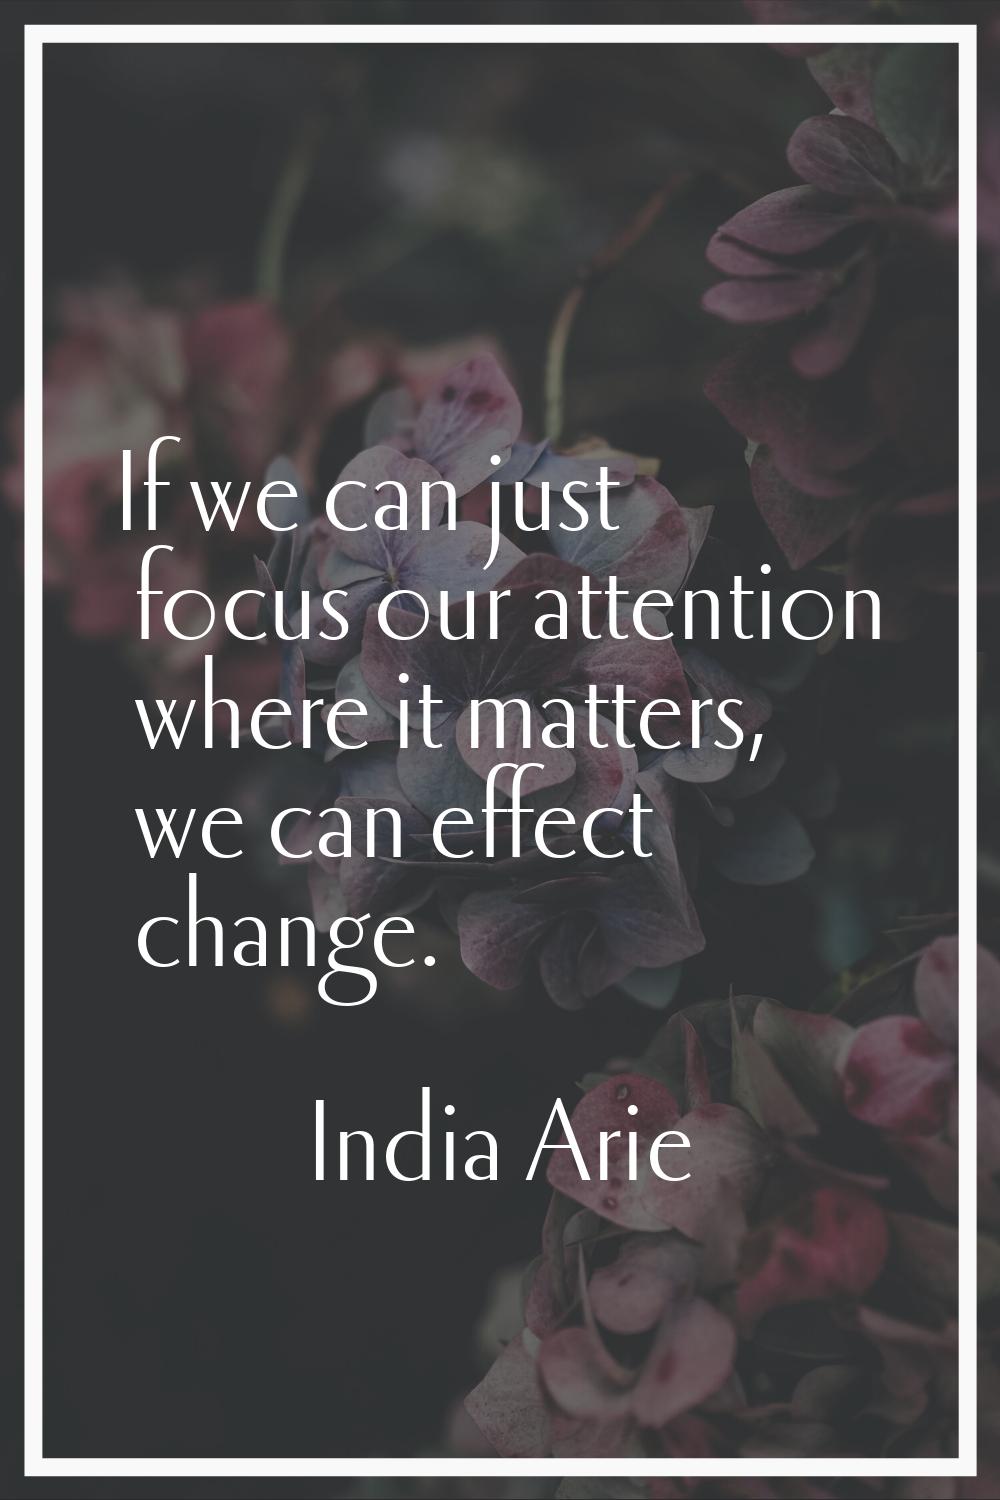 If we can just focus our attention where it matters, we can effect change.